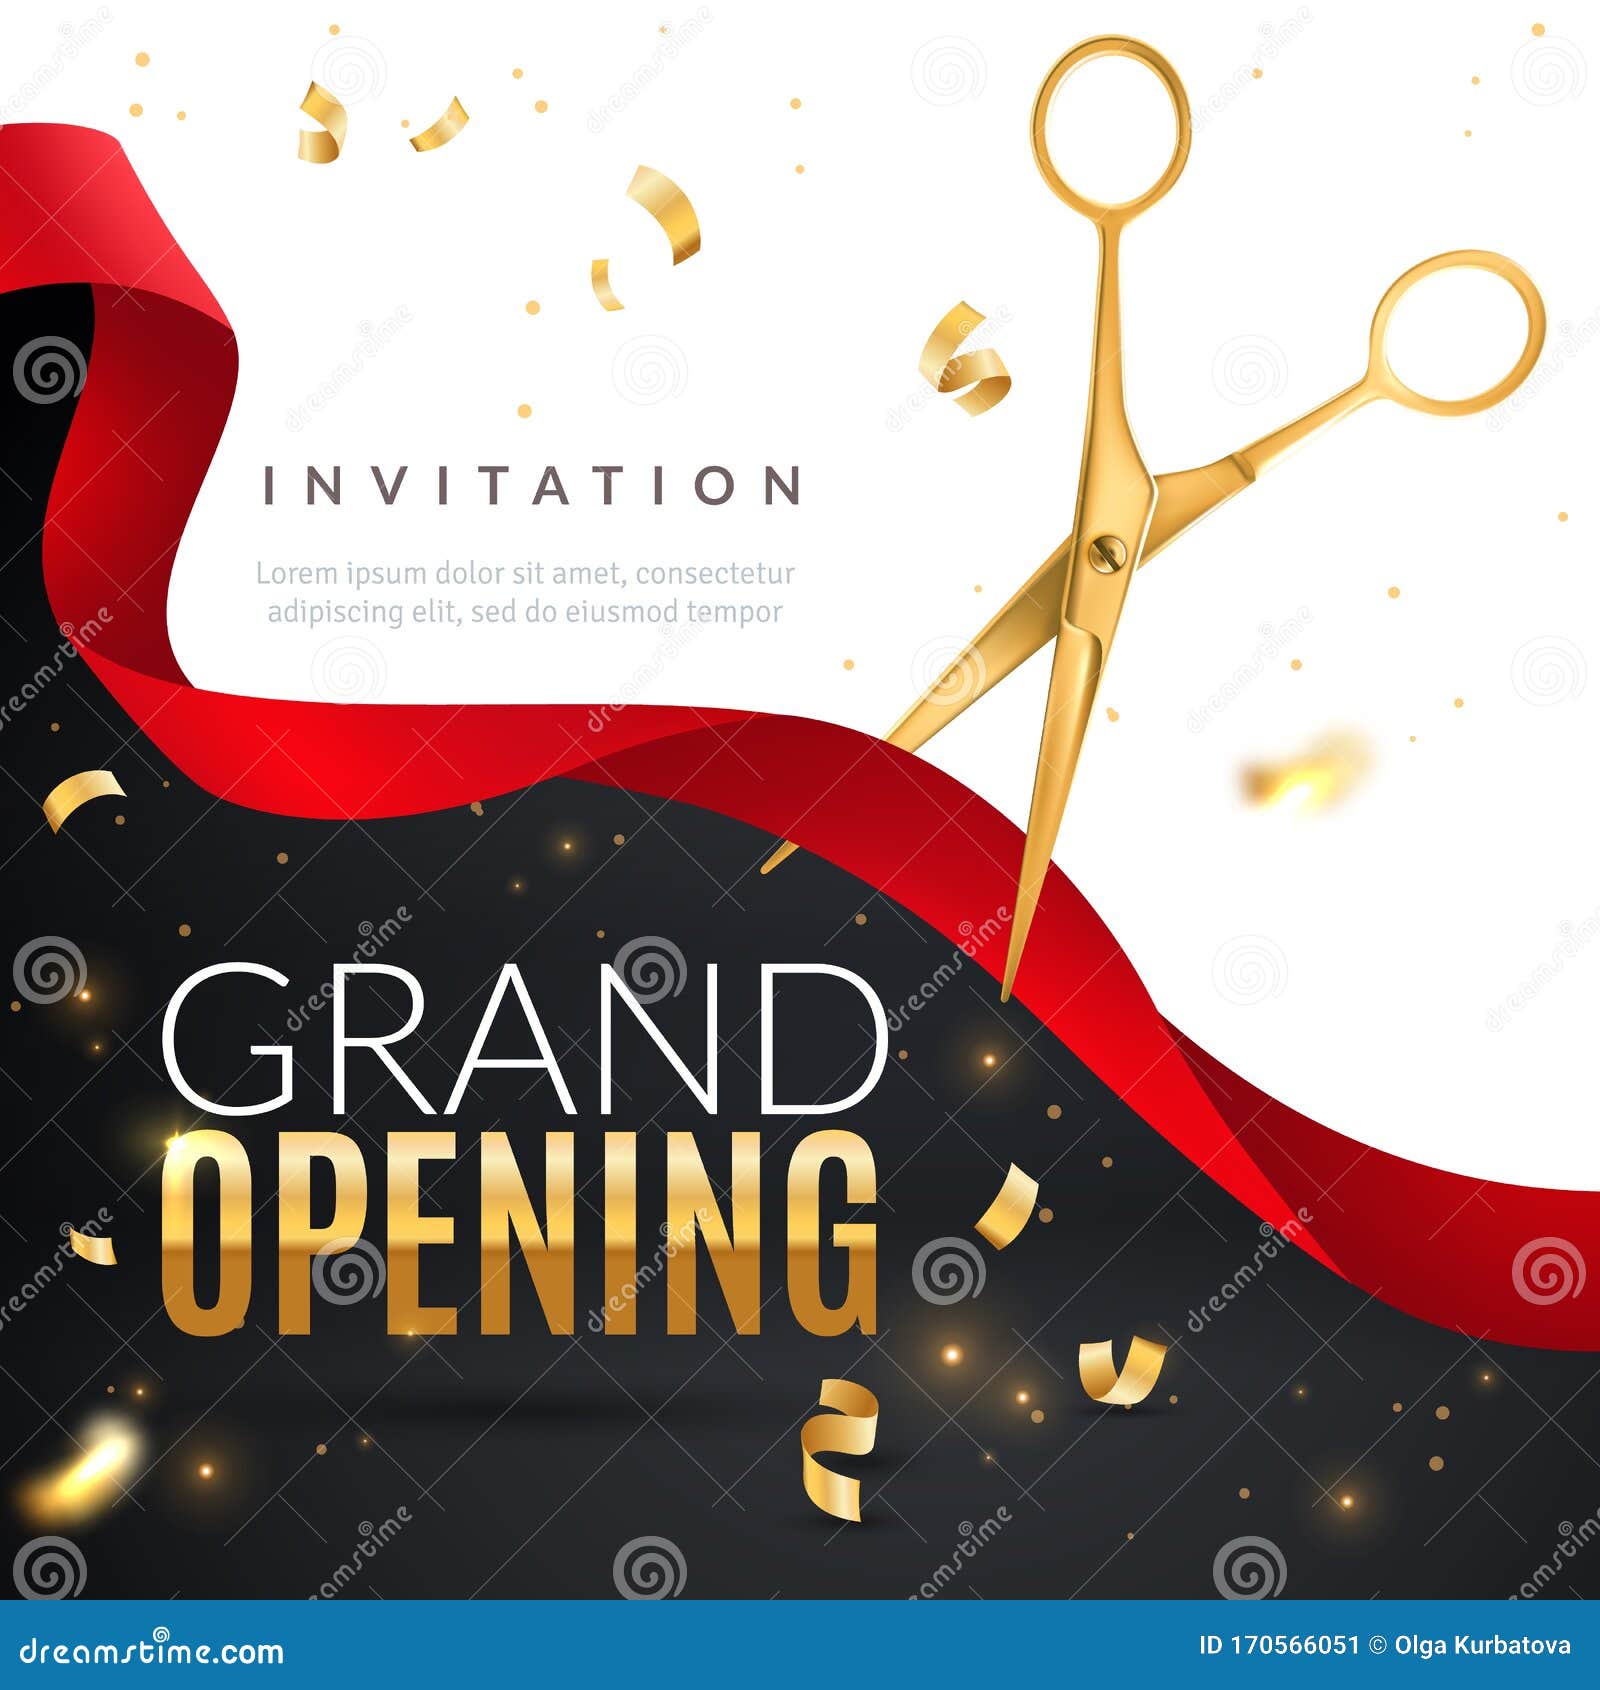 grand opening. golden confetti and scissors cutting red silk ribbon, inauguration ceremony banner, opening celebration